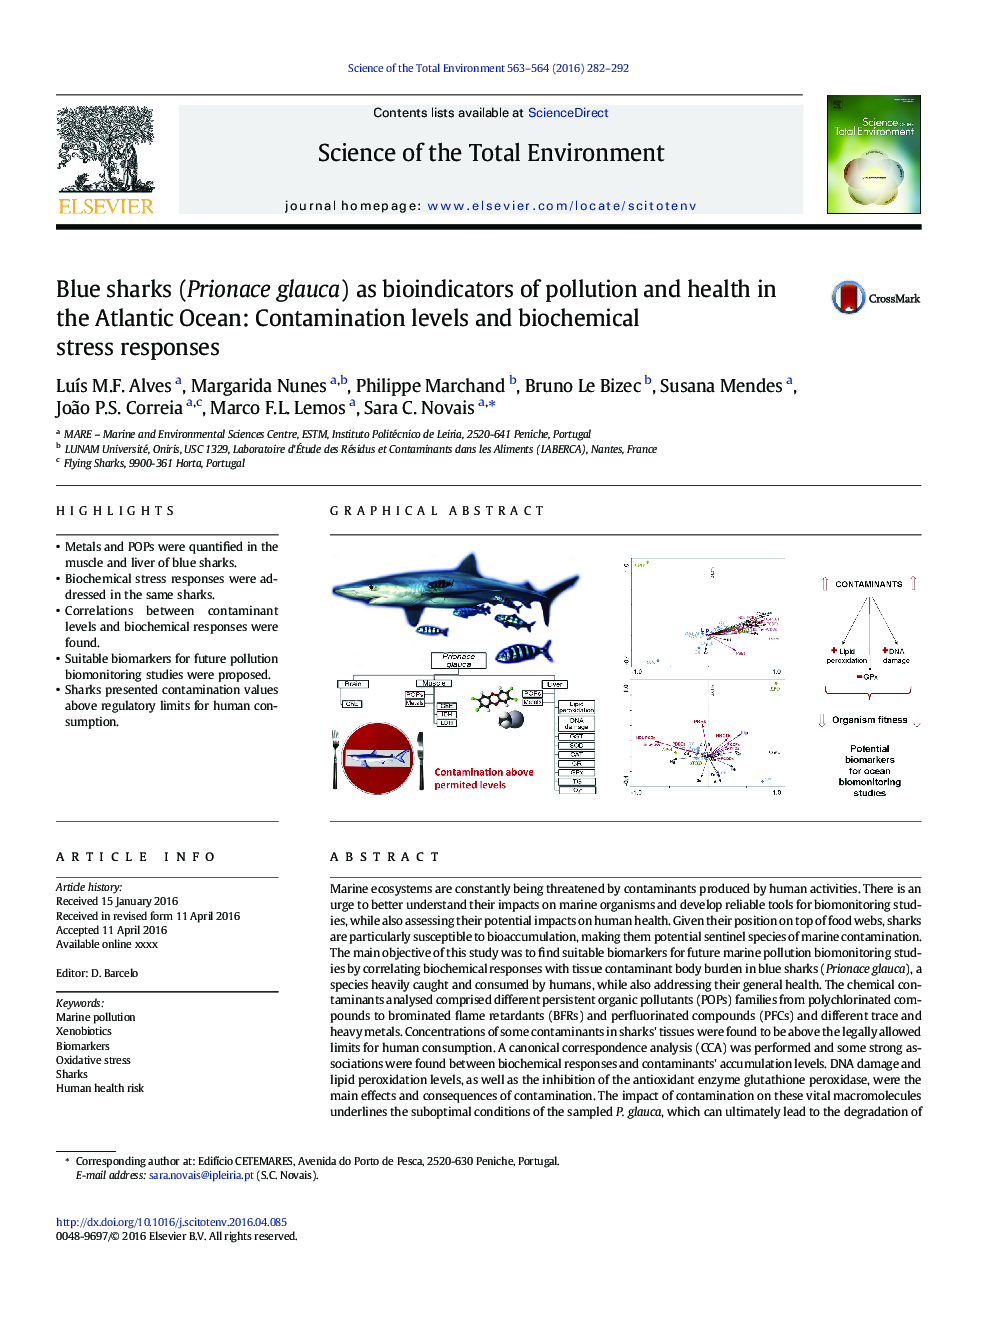 Blue sharks (Prionace glauca) as bioindicators of pollution and health in the Atlantic Ocean: Contamination levels and biochemical stress responses